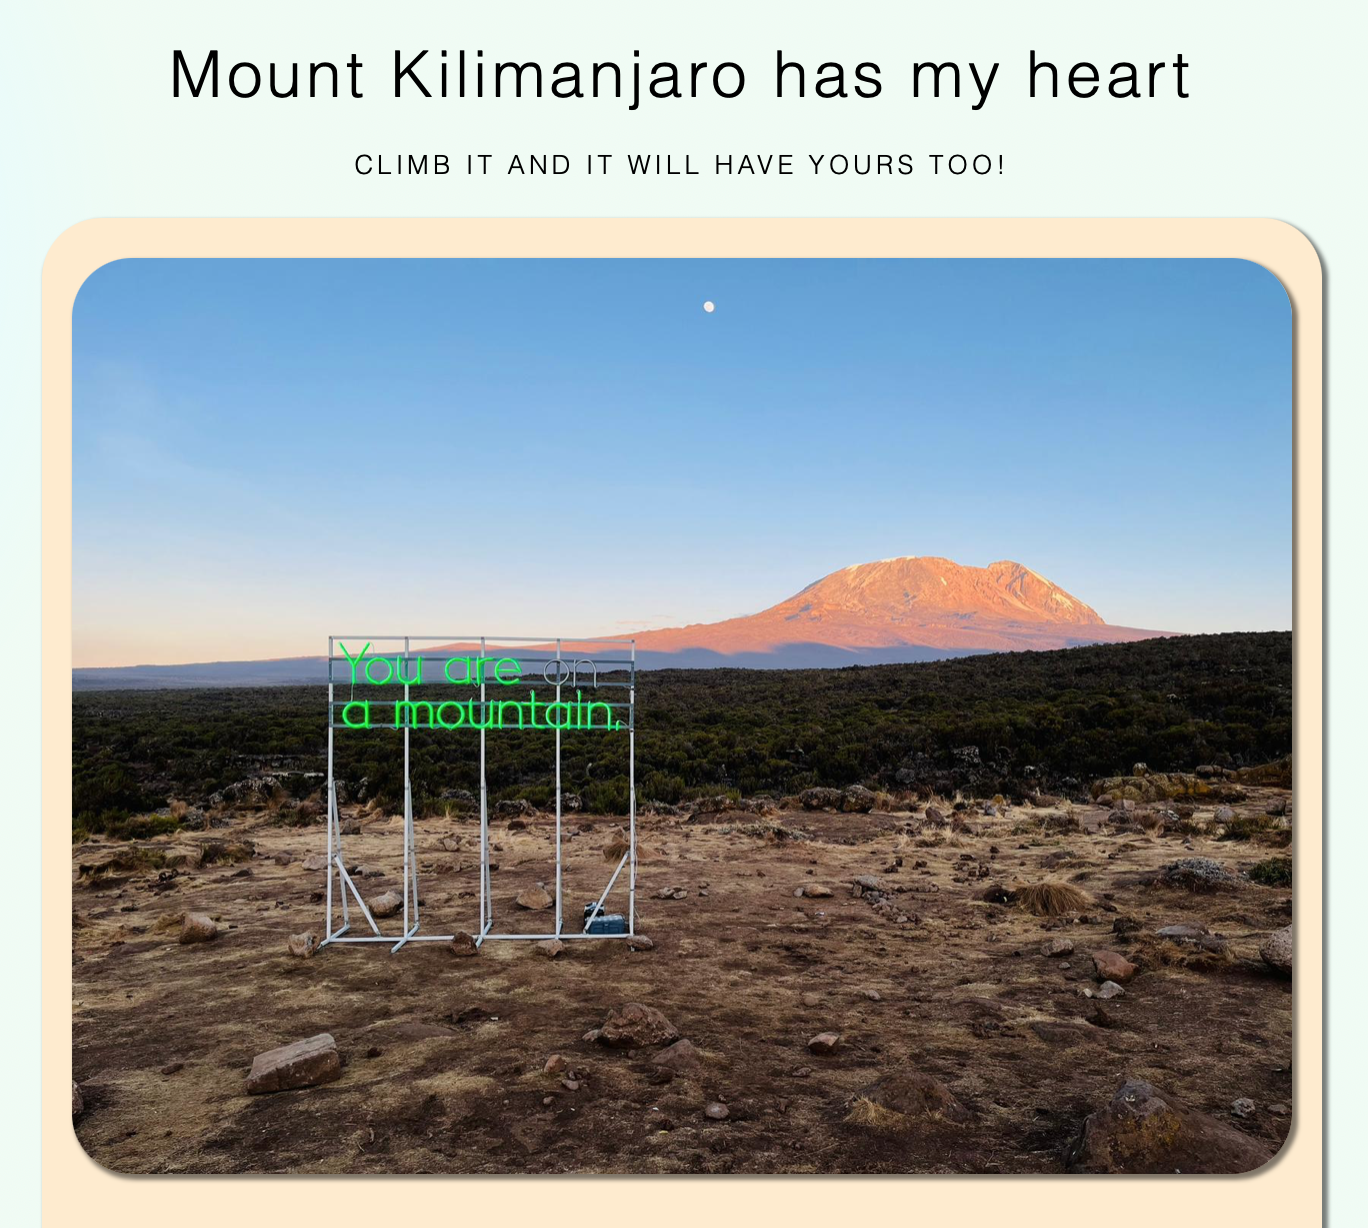 A sign that says'You are a mountain' with the top of Kilimanjaro in the background.